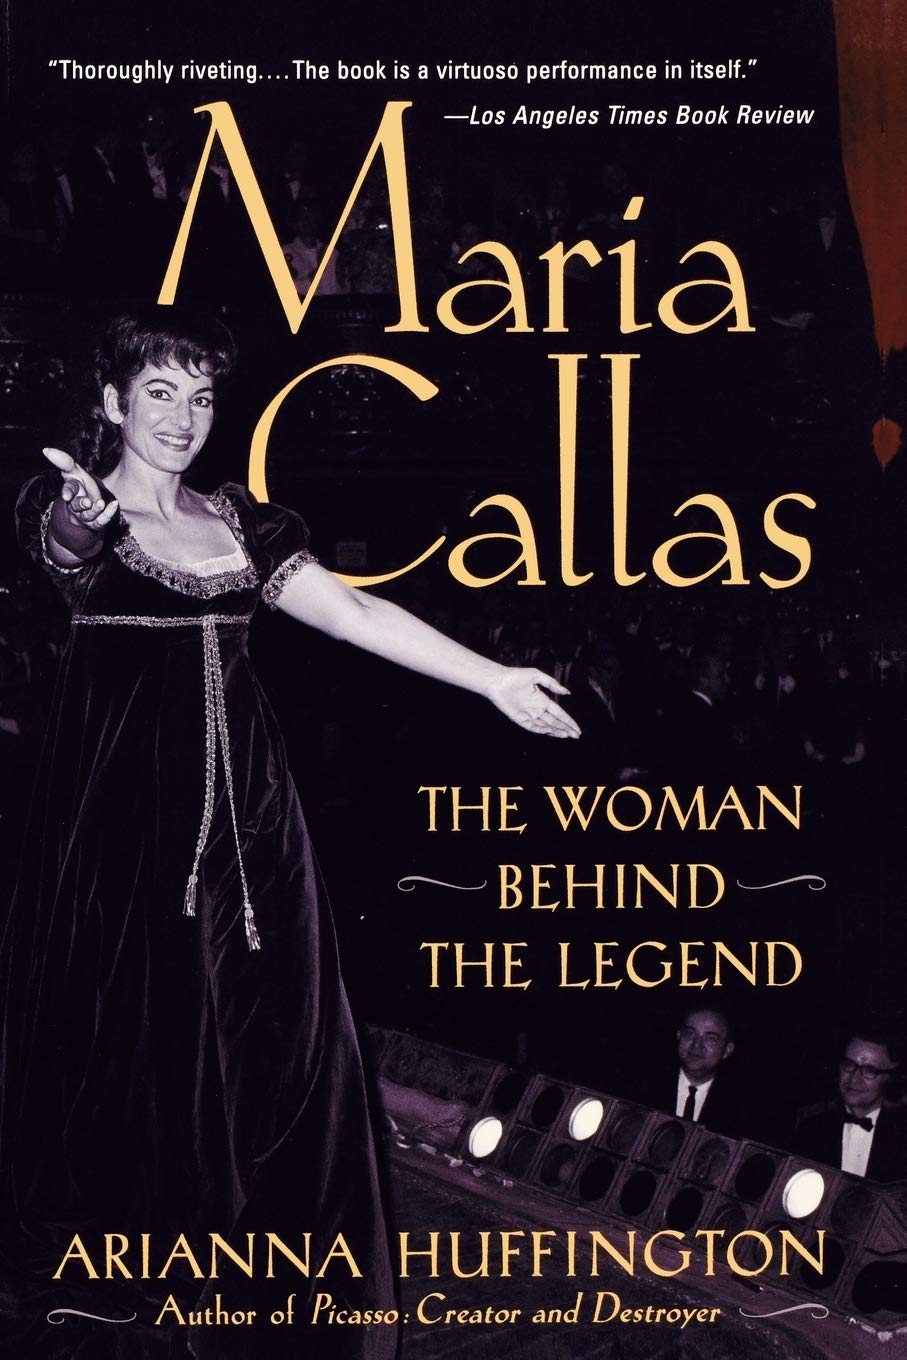 Maria Callas- The woman behind the legend